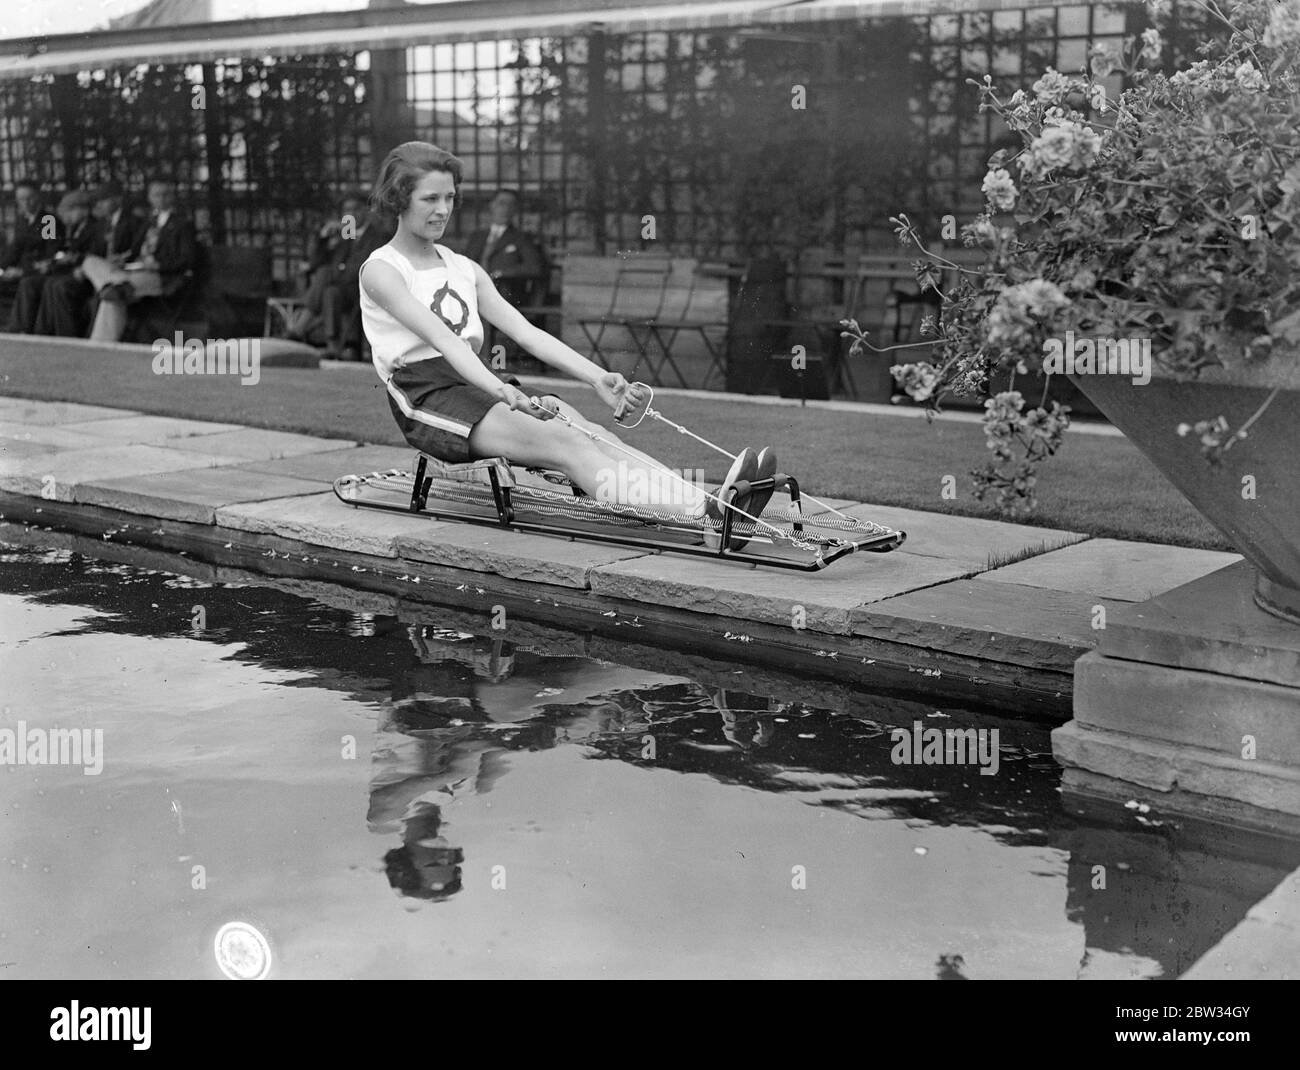 Olympic Games representative practices at lunch time on roof on store . Miss Violet Webb , who has been chosen to represent Great Britain in the hurdles at the Olympic Games at Los Angeles , USA practices every lunch hour on the roof of Selfridges store , where she is employed . Miss Violet Webb in training on a sculling trainer during her roof lunch hour practice . 22 June 1932 Stock Photo